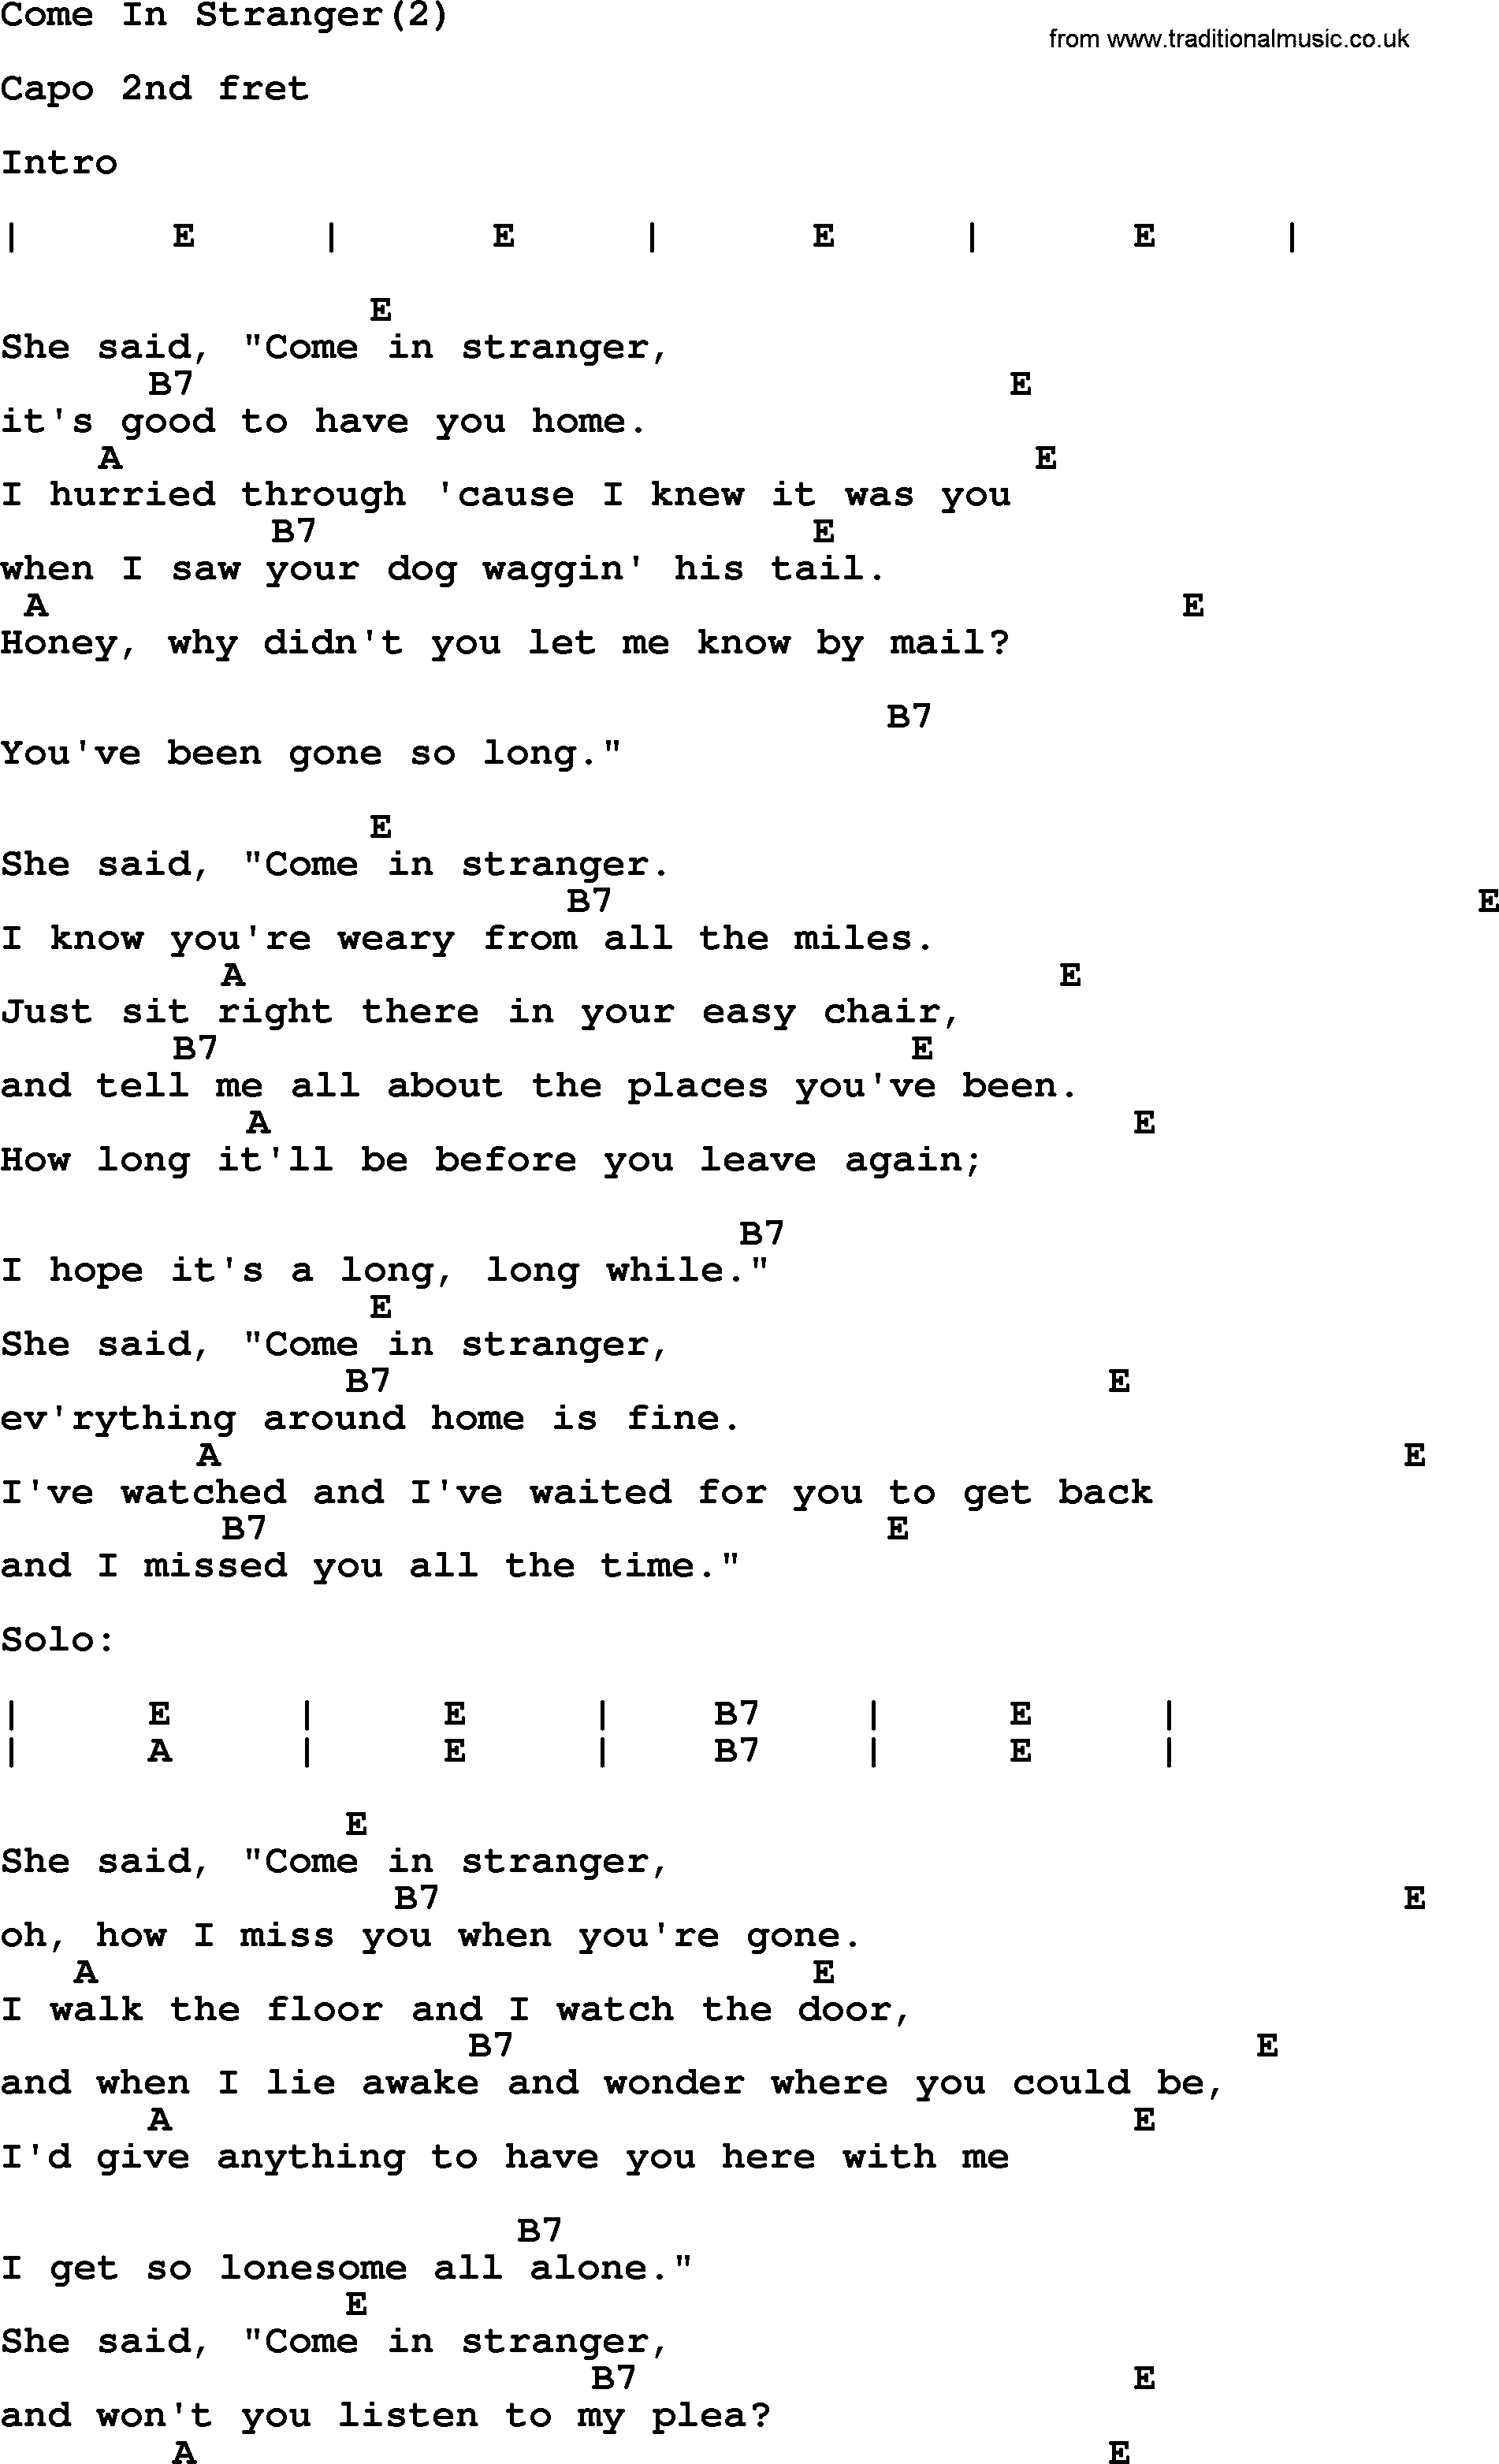 Johnny Cash song Come In Stranger(2), lyrics and chords